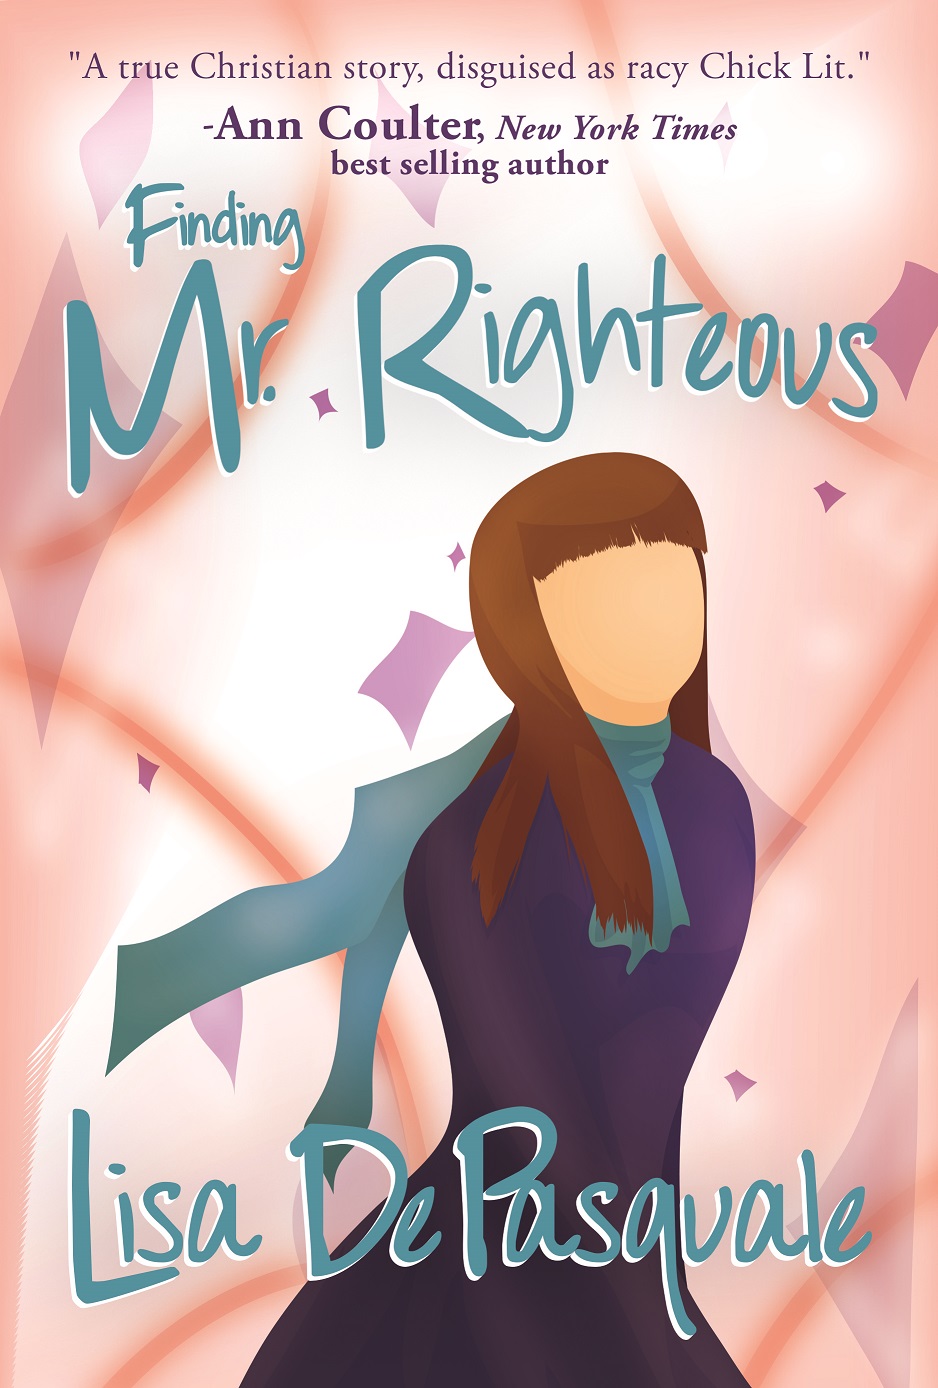 'Finding Mr. Righteous' Now Available for Pre-Order